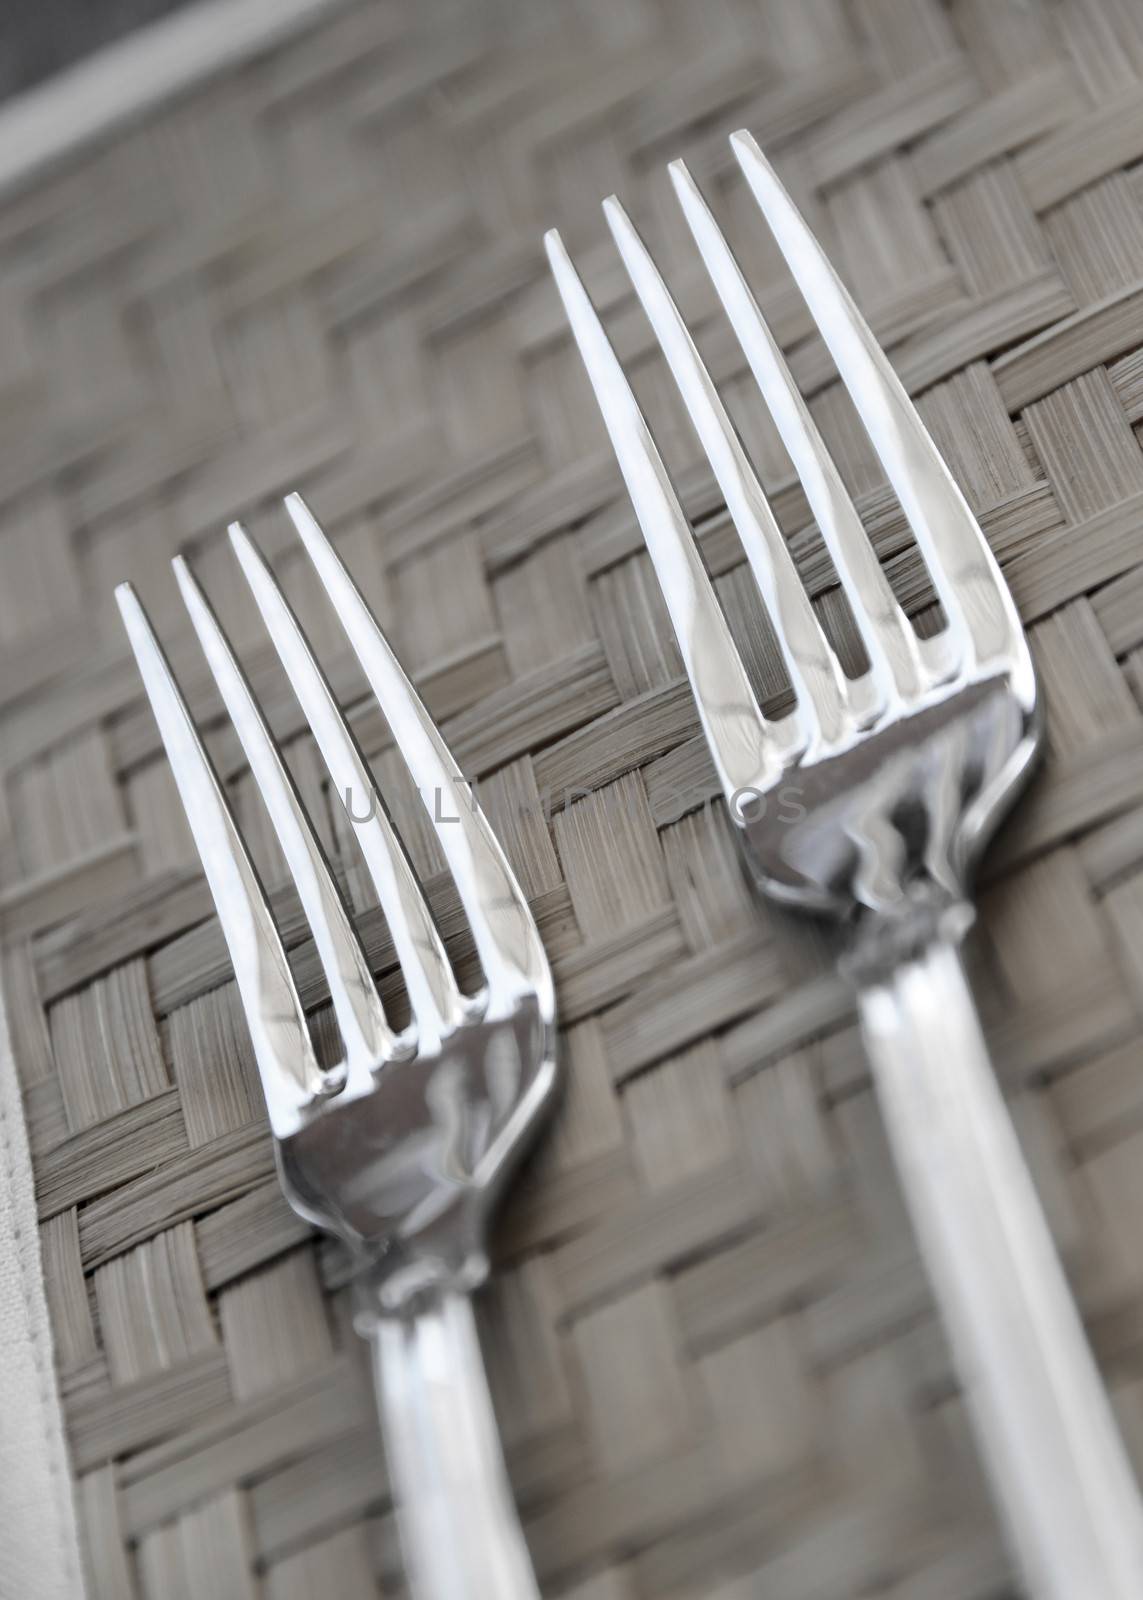 Two forks in a restaurant